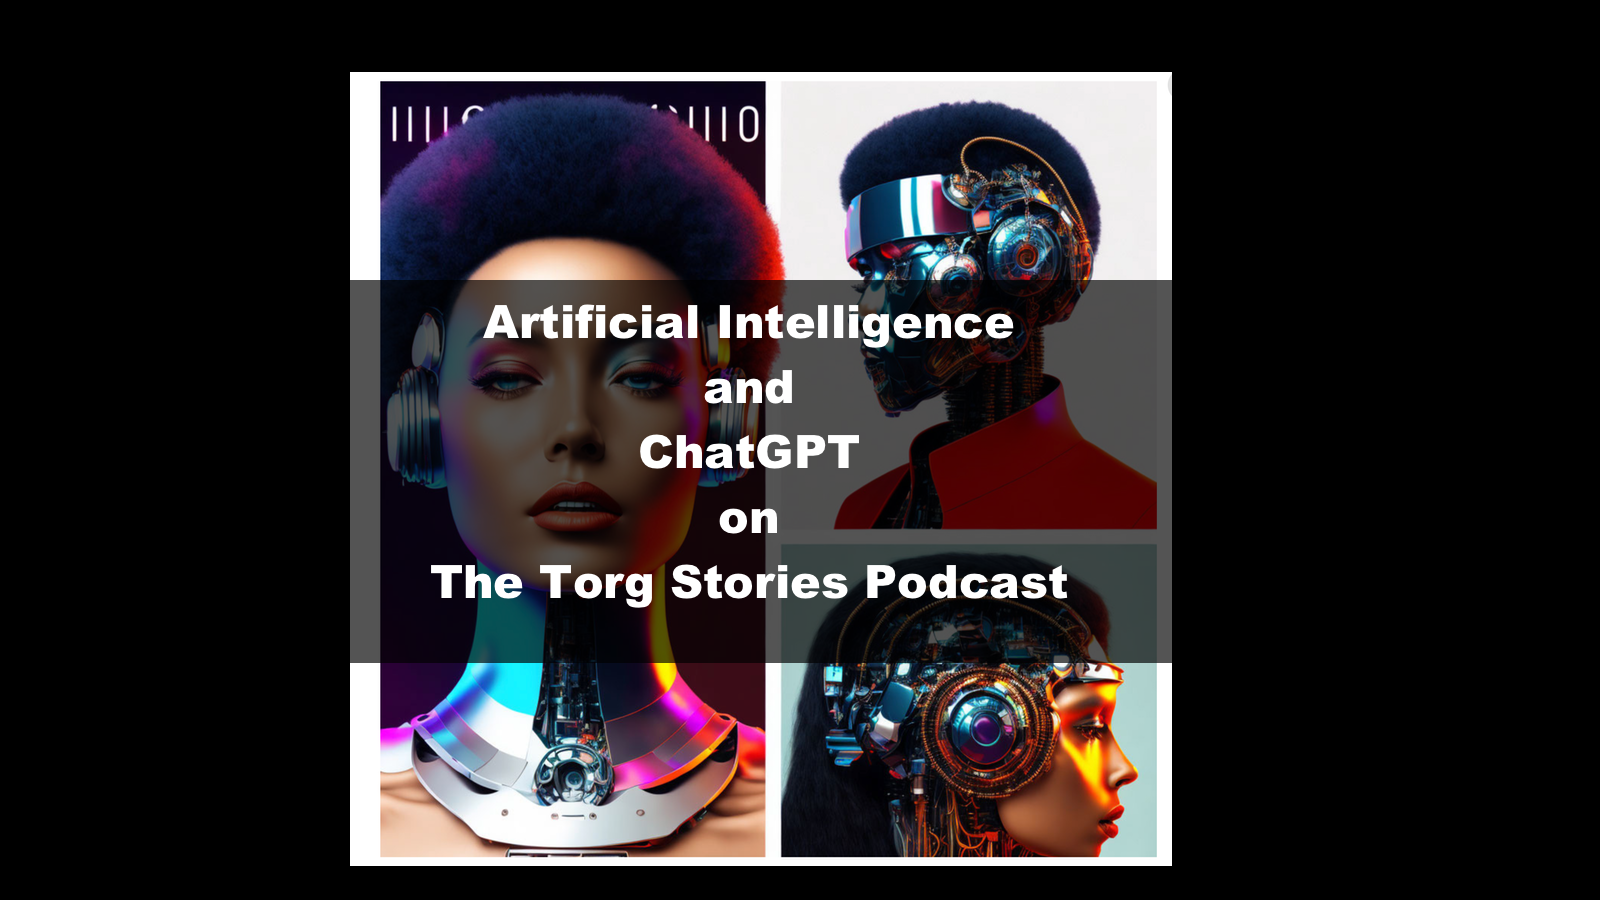 Getting Started on ChatGPT and Artificial Intelligence